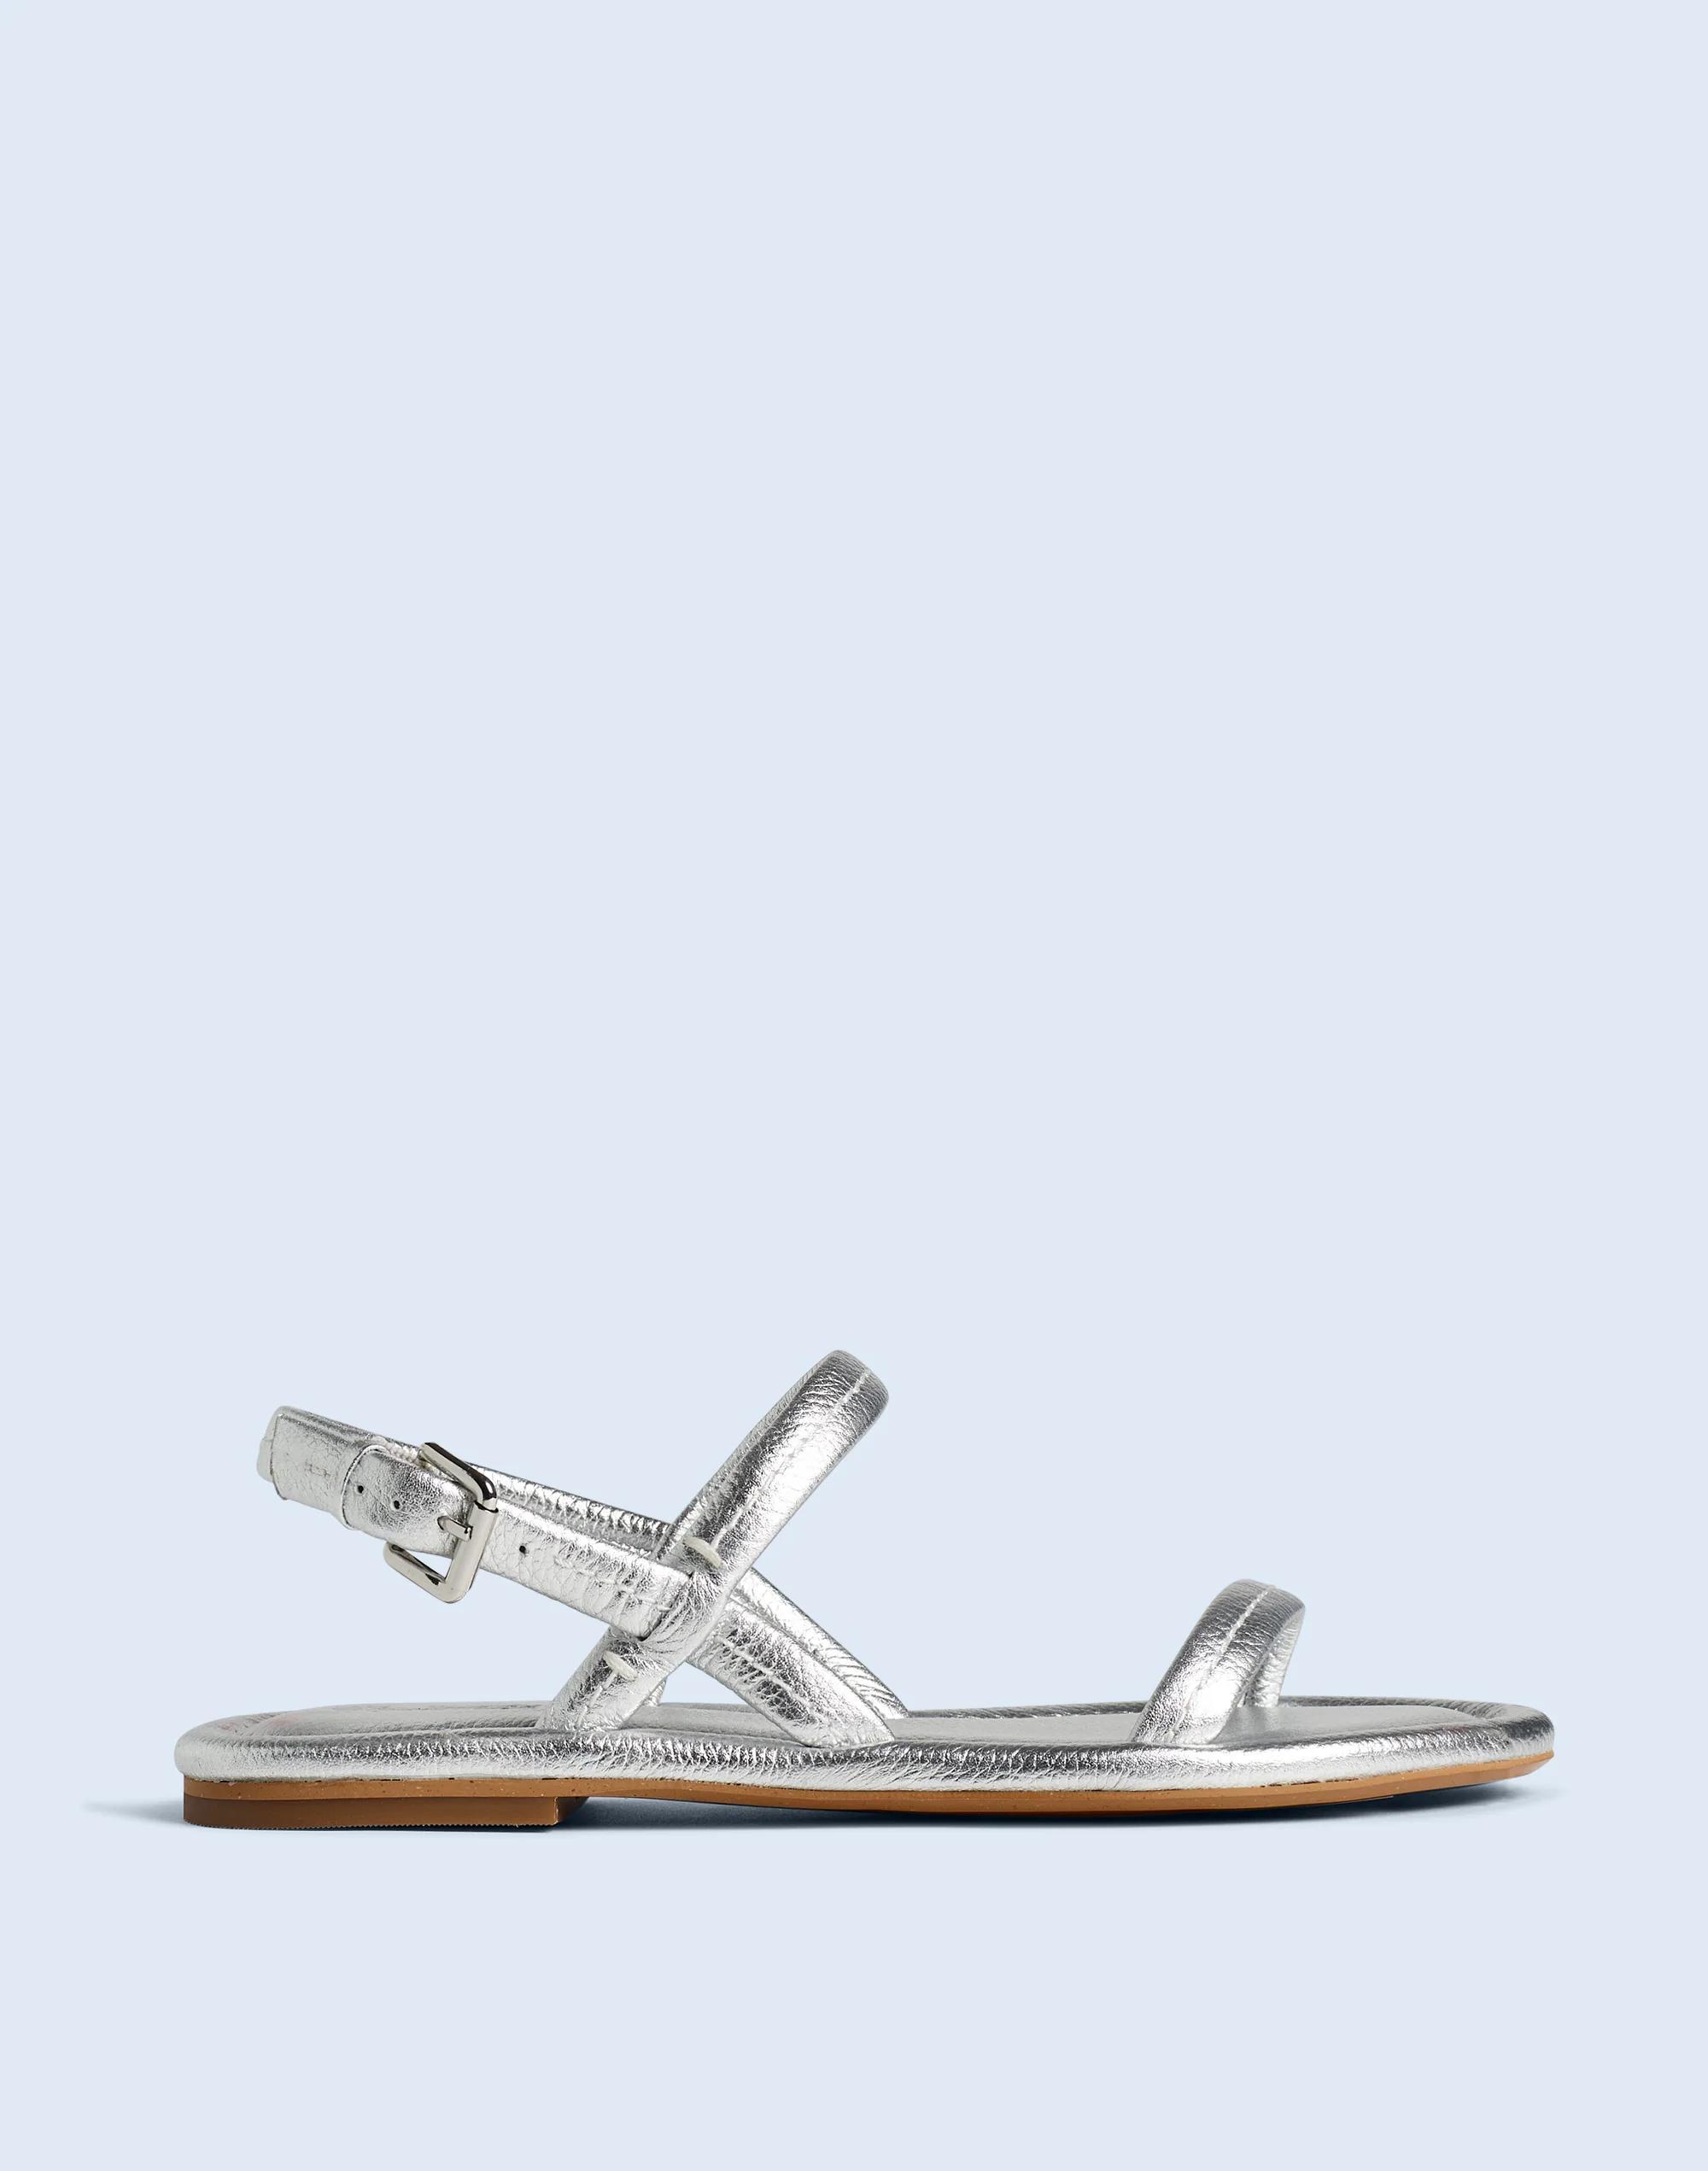 The Janine Slingback Sandal in Metallic Leather Product Image